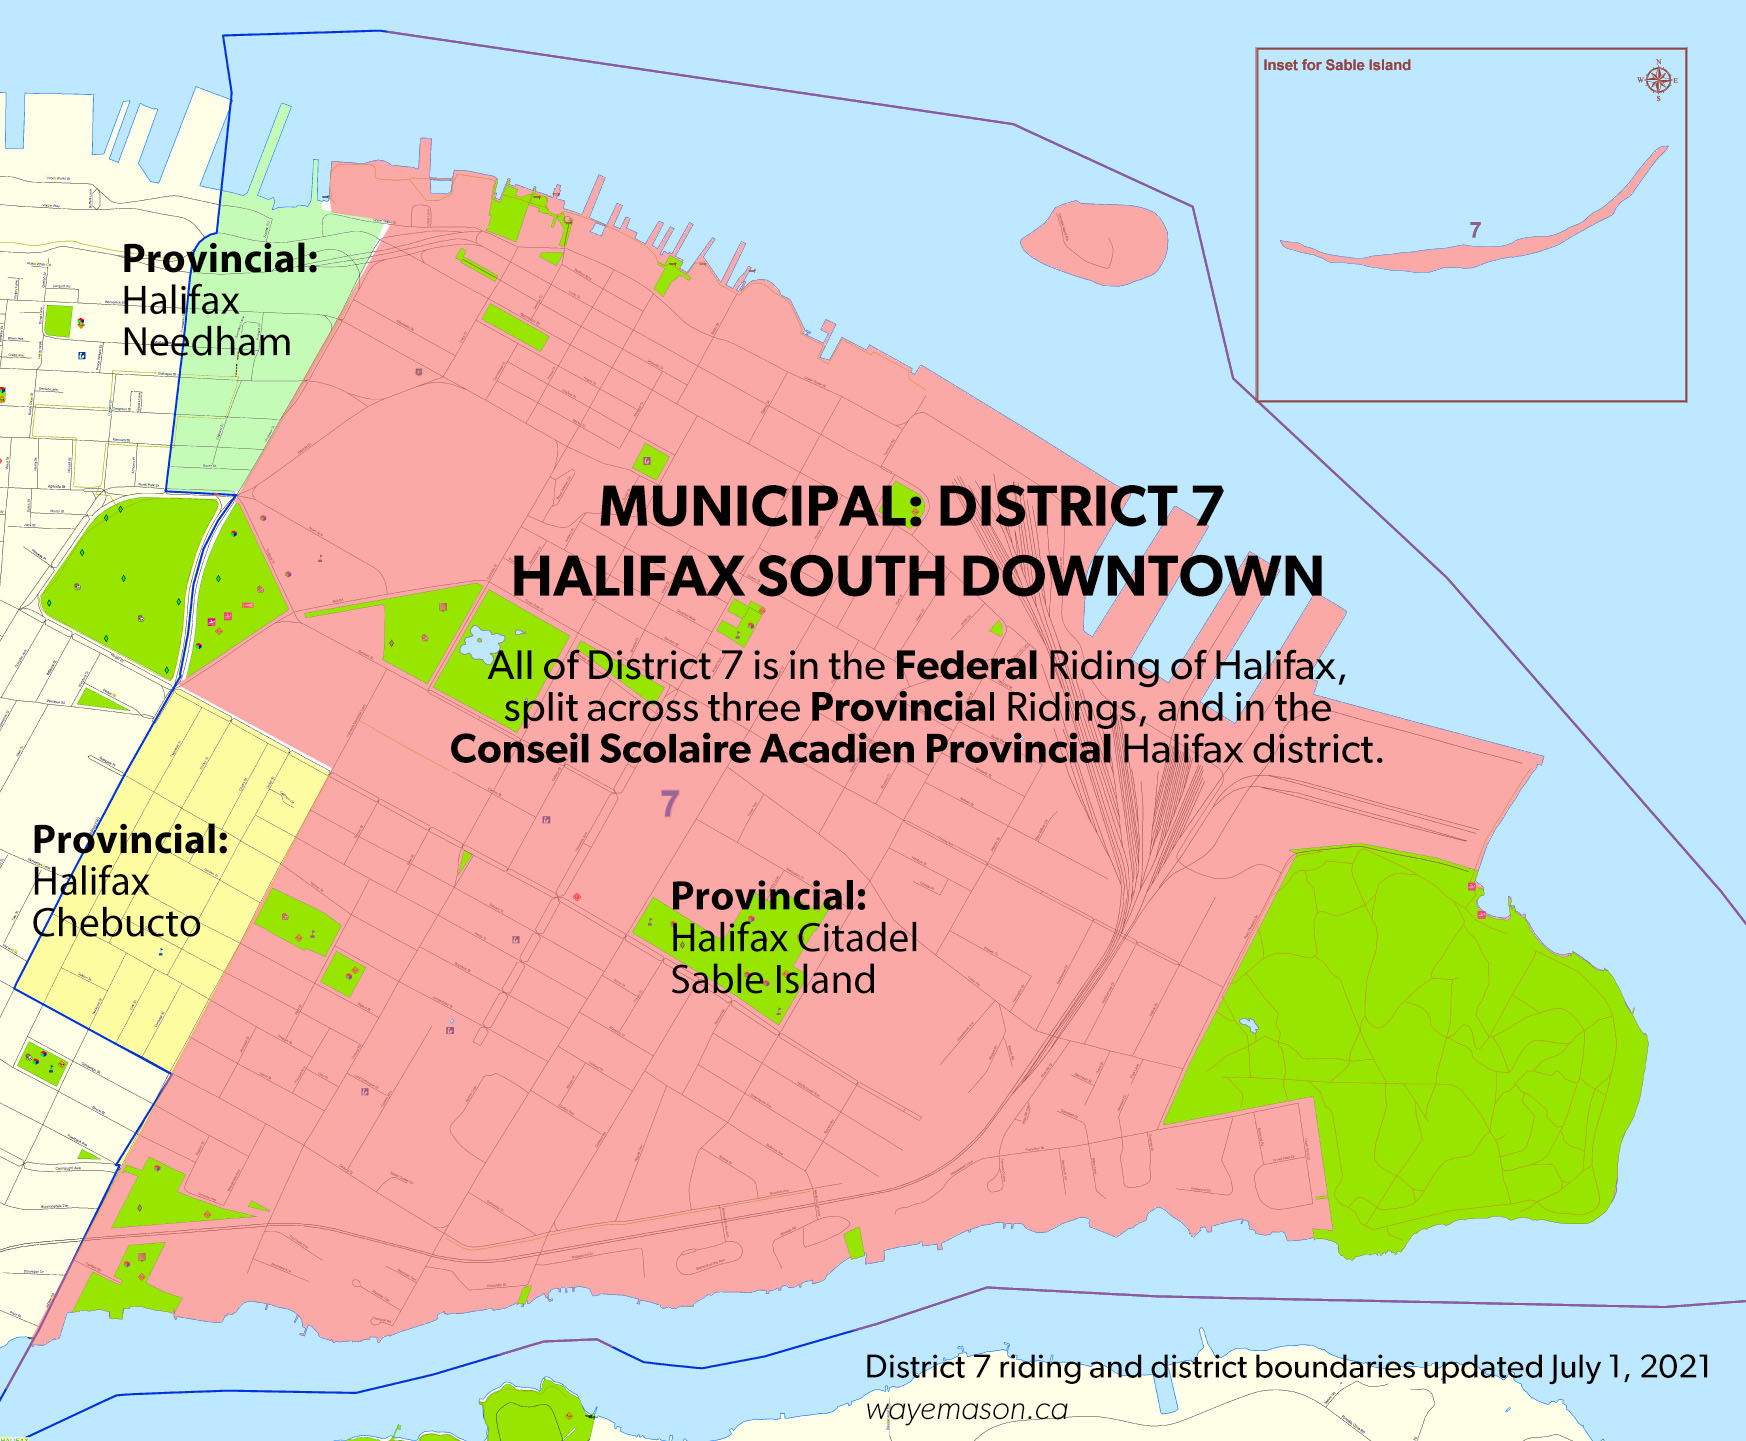 Map of District 7 showing political divisions (Federal, Provincial, Conseil, Municipal)